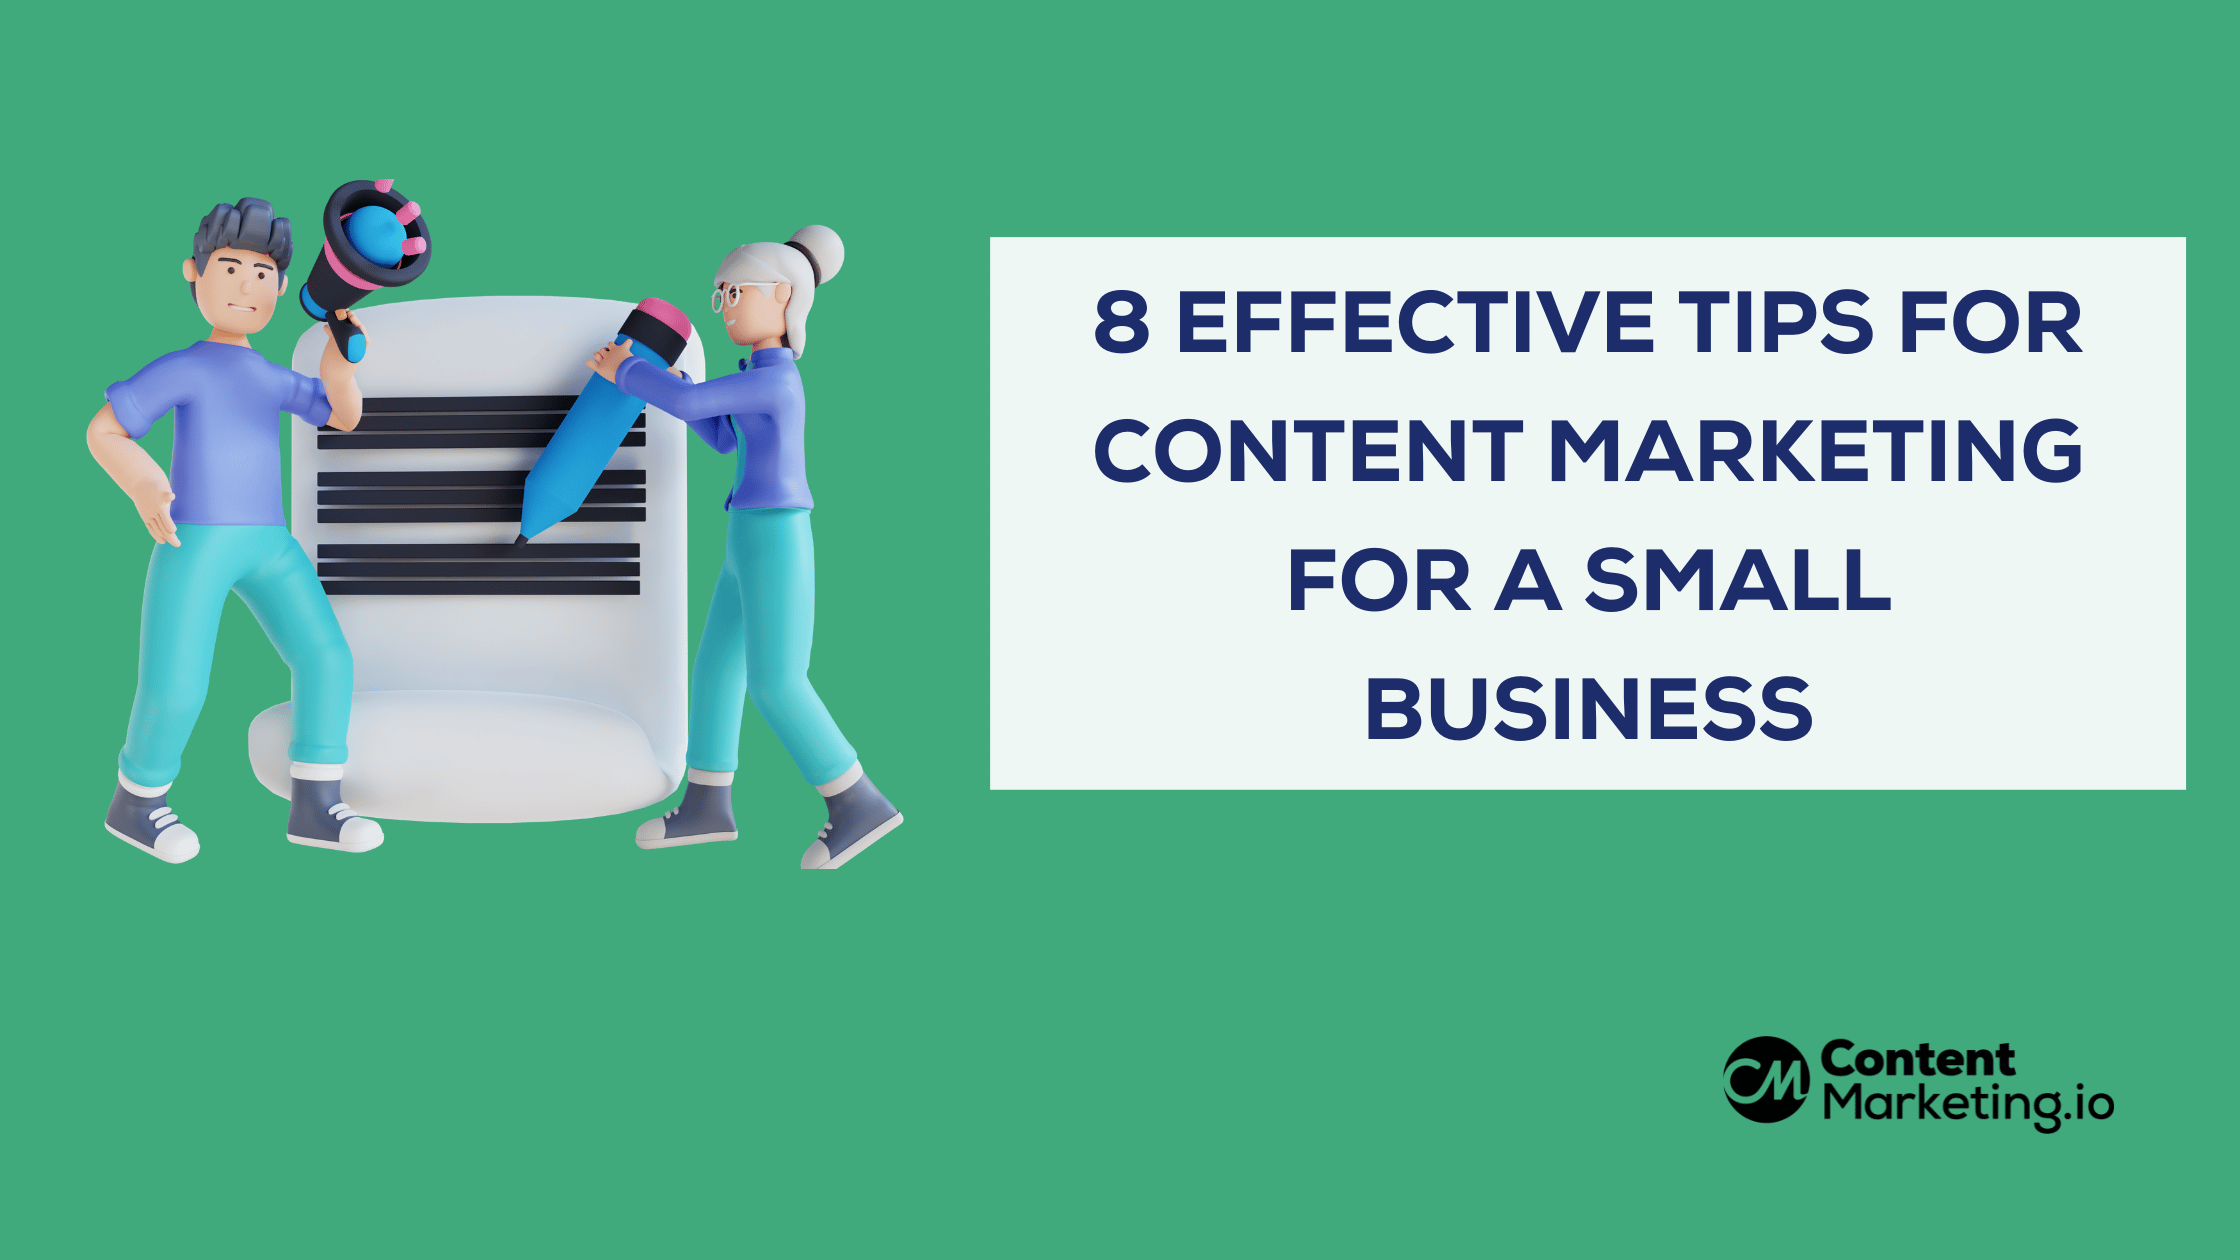 8 Effective Tips for Content Marketing for Small Business